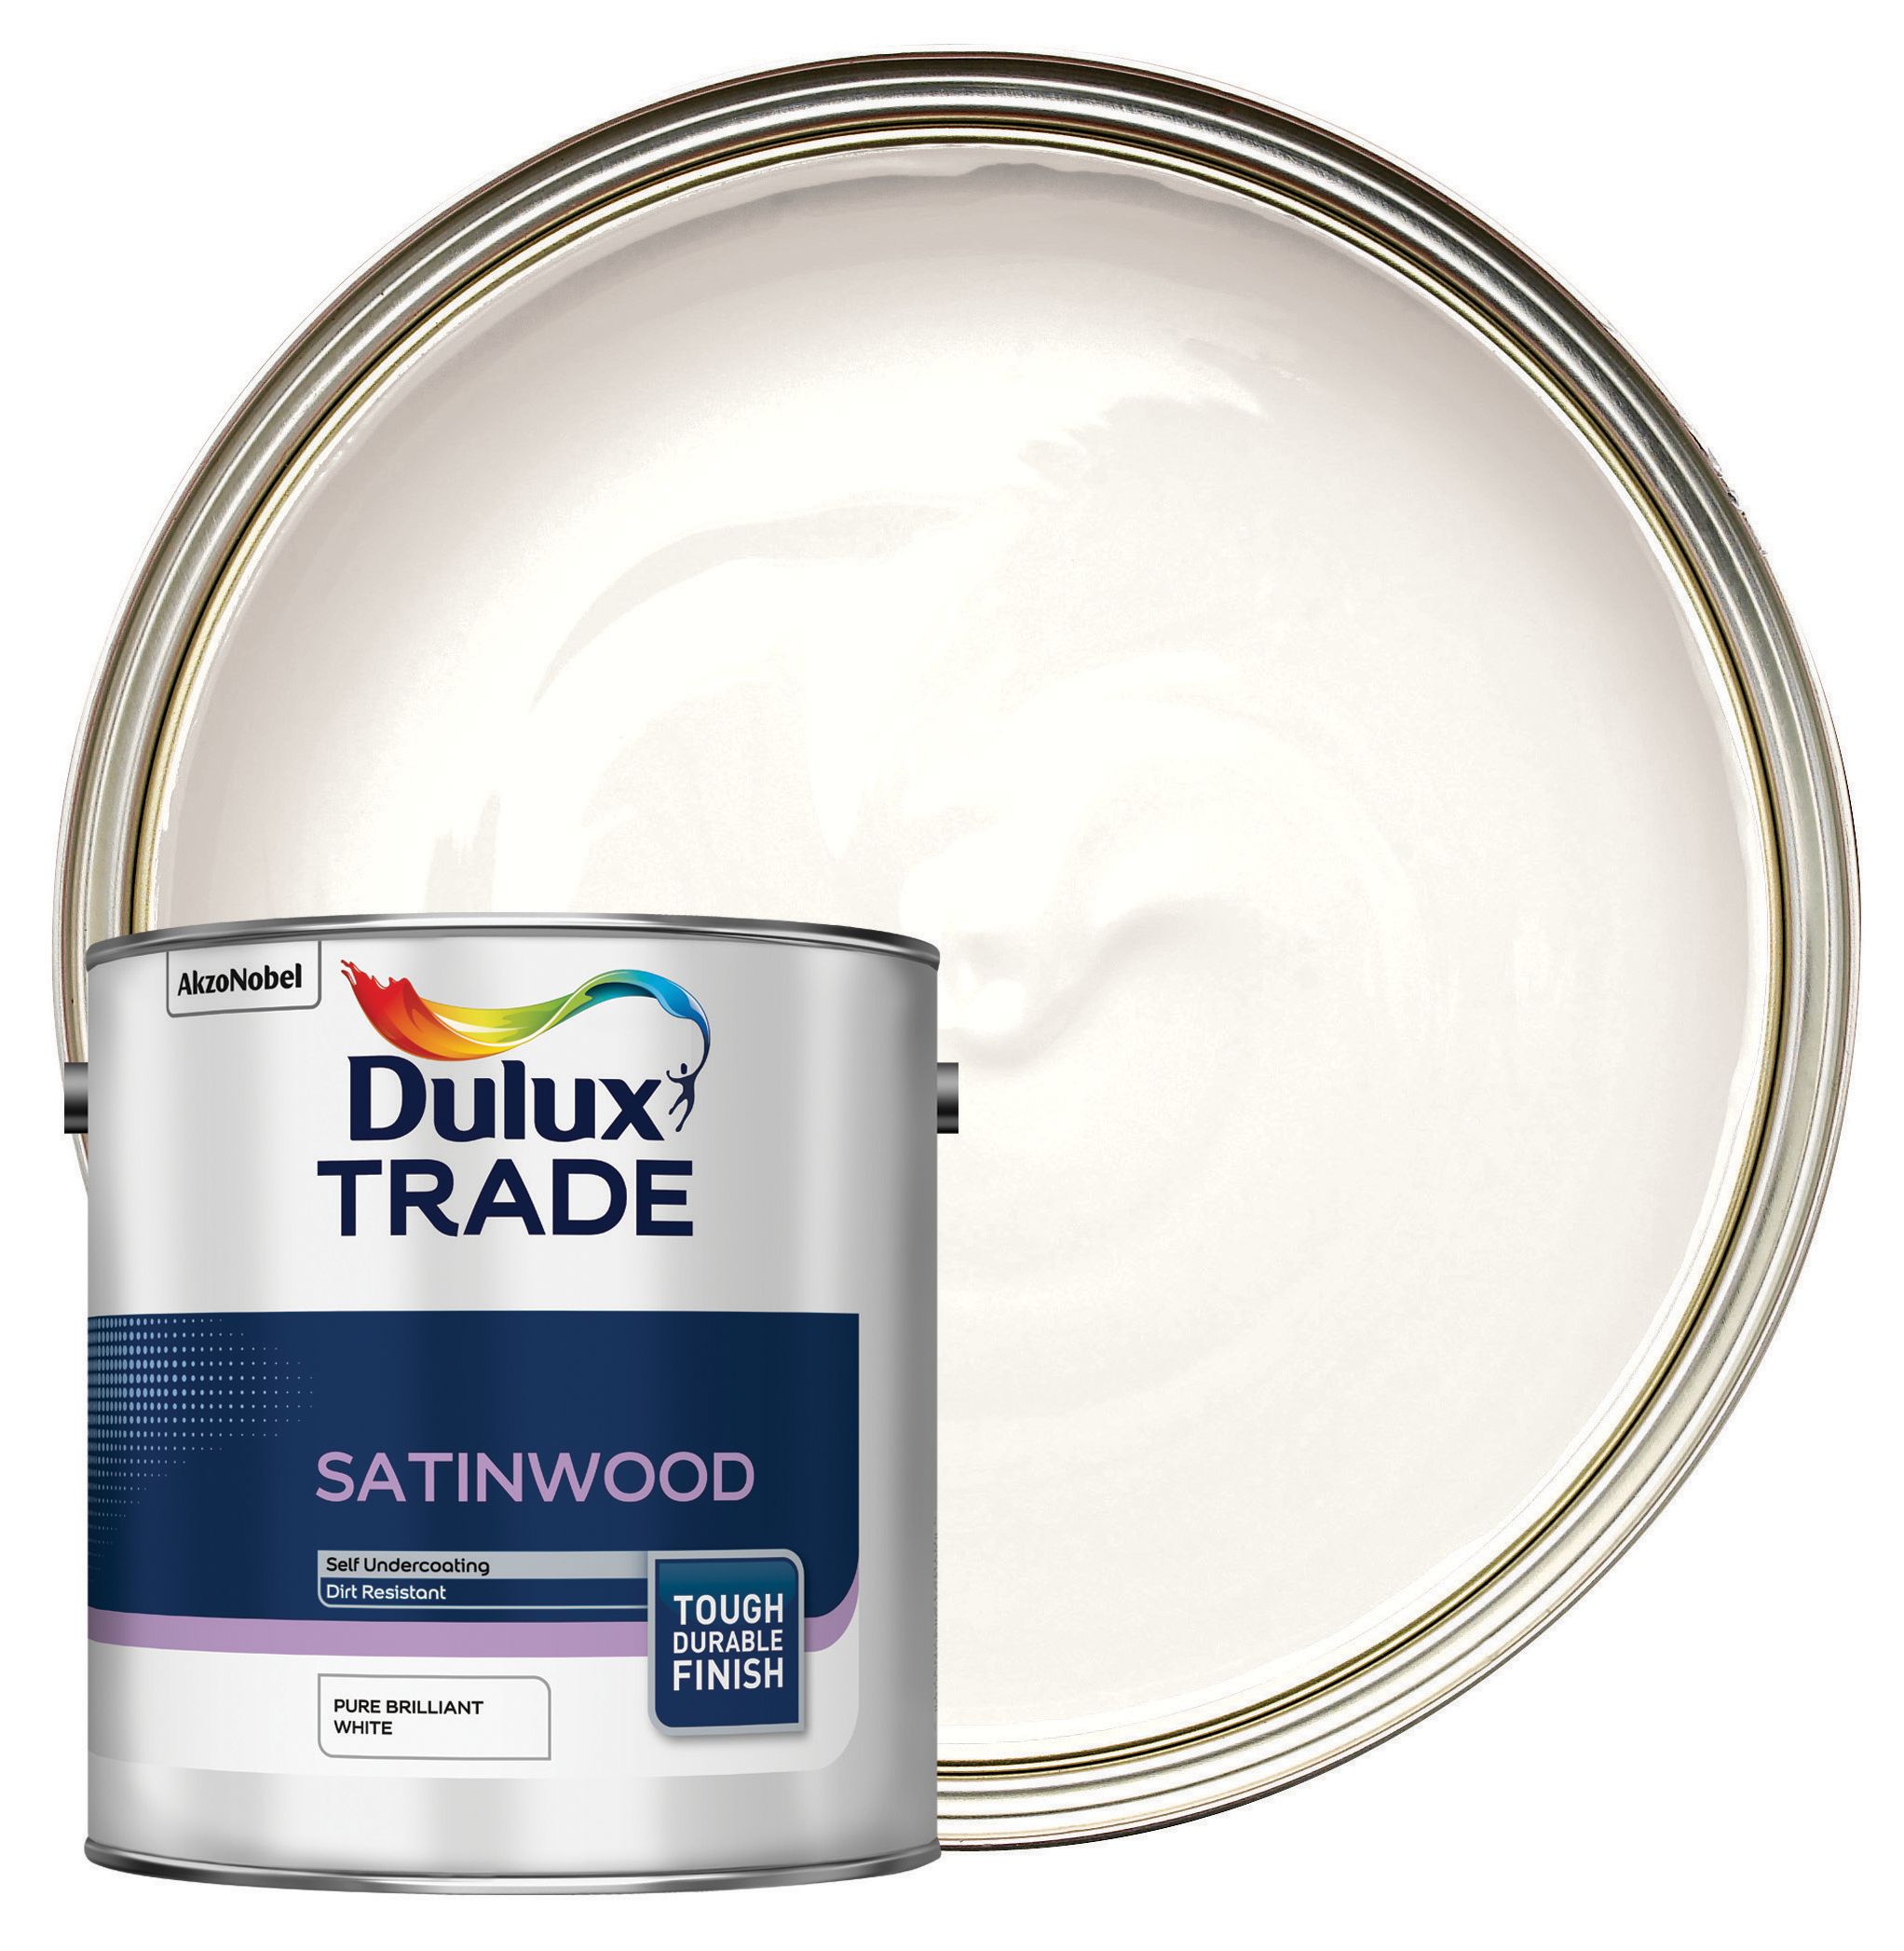 Image of Dulux Trade Satinwood Paint - Pure Brilliant White - 2.5L